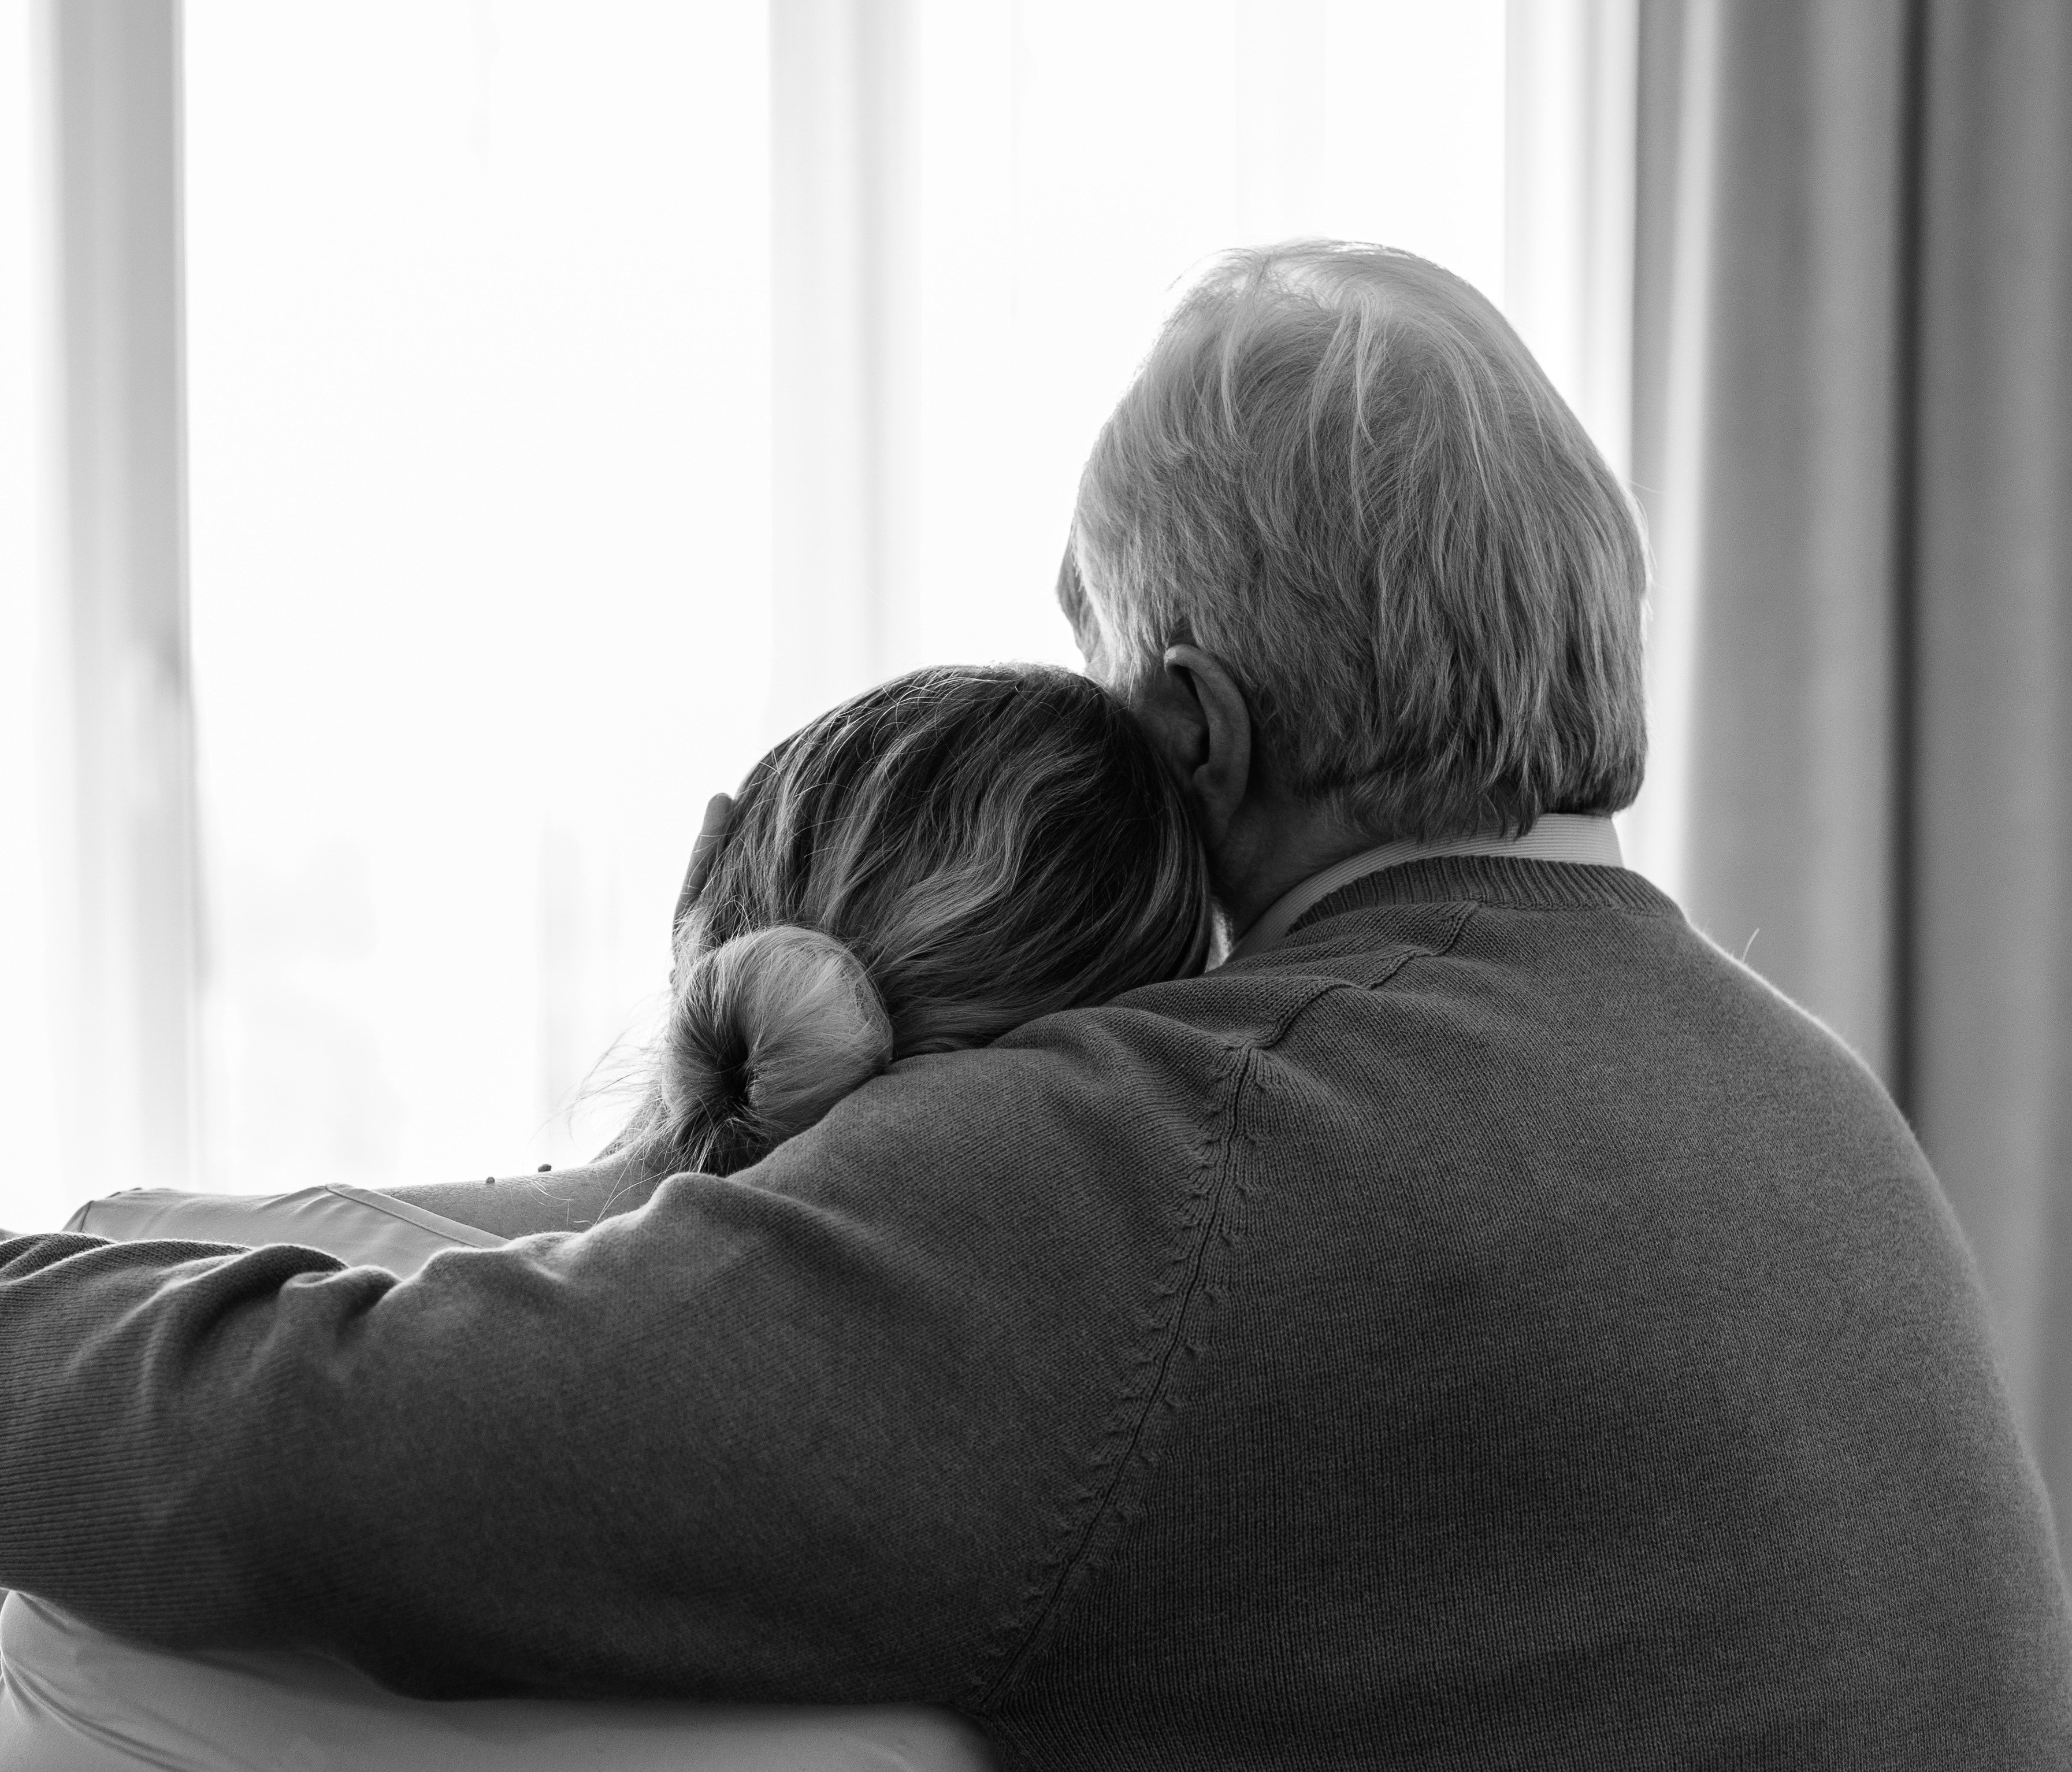 The previous owner reminisces about his late wife who died in OP's house | Photo: Pexels